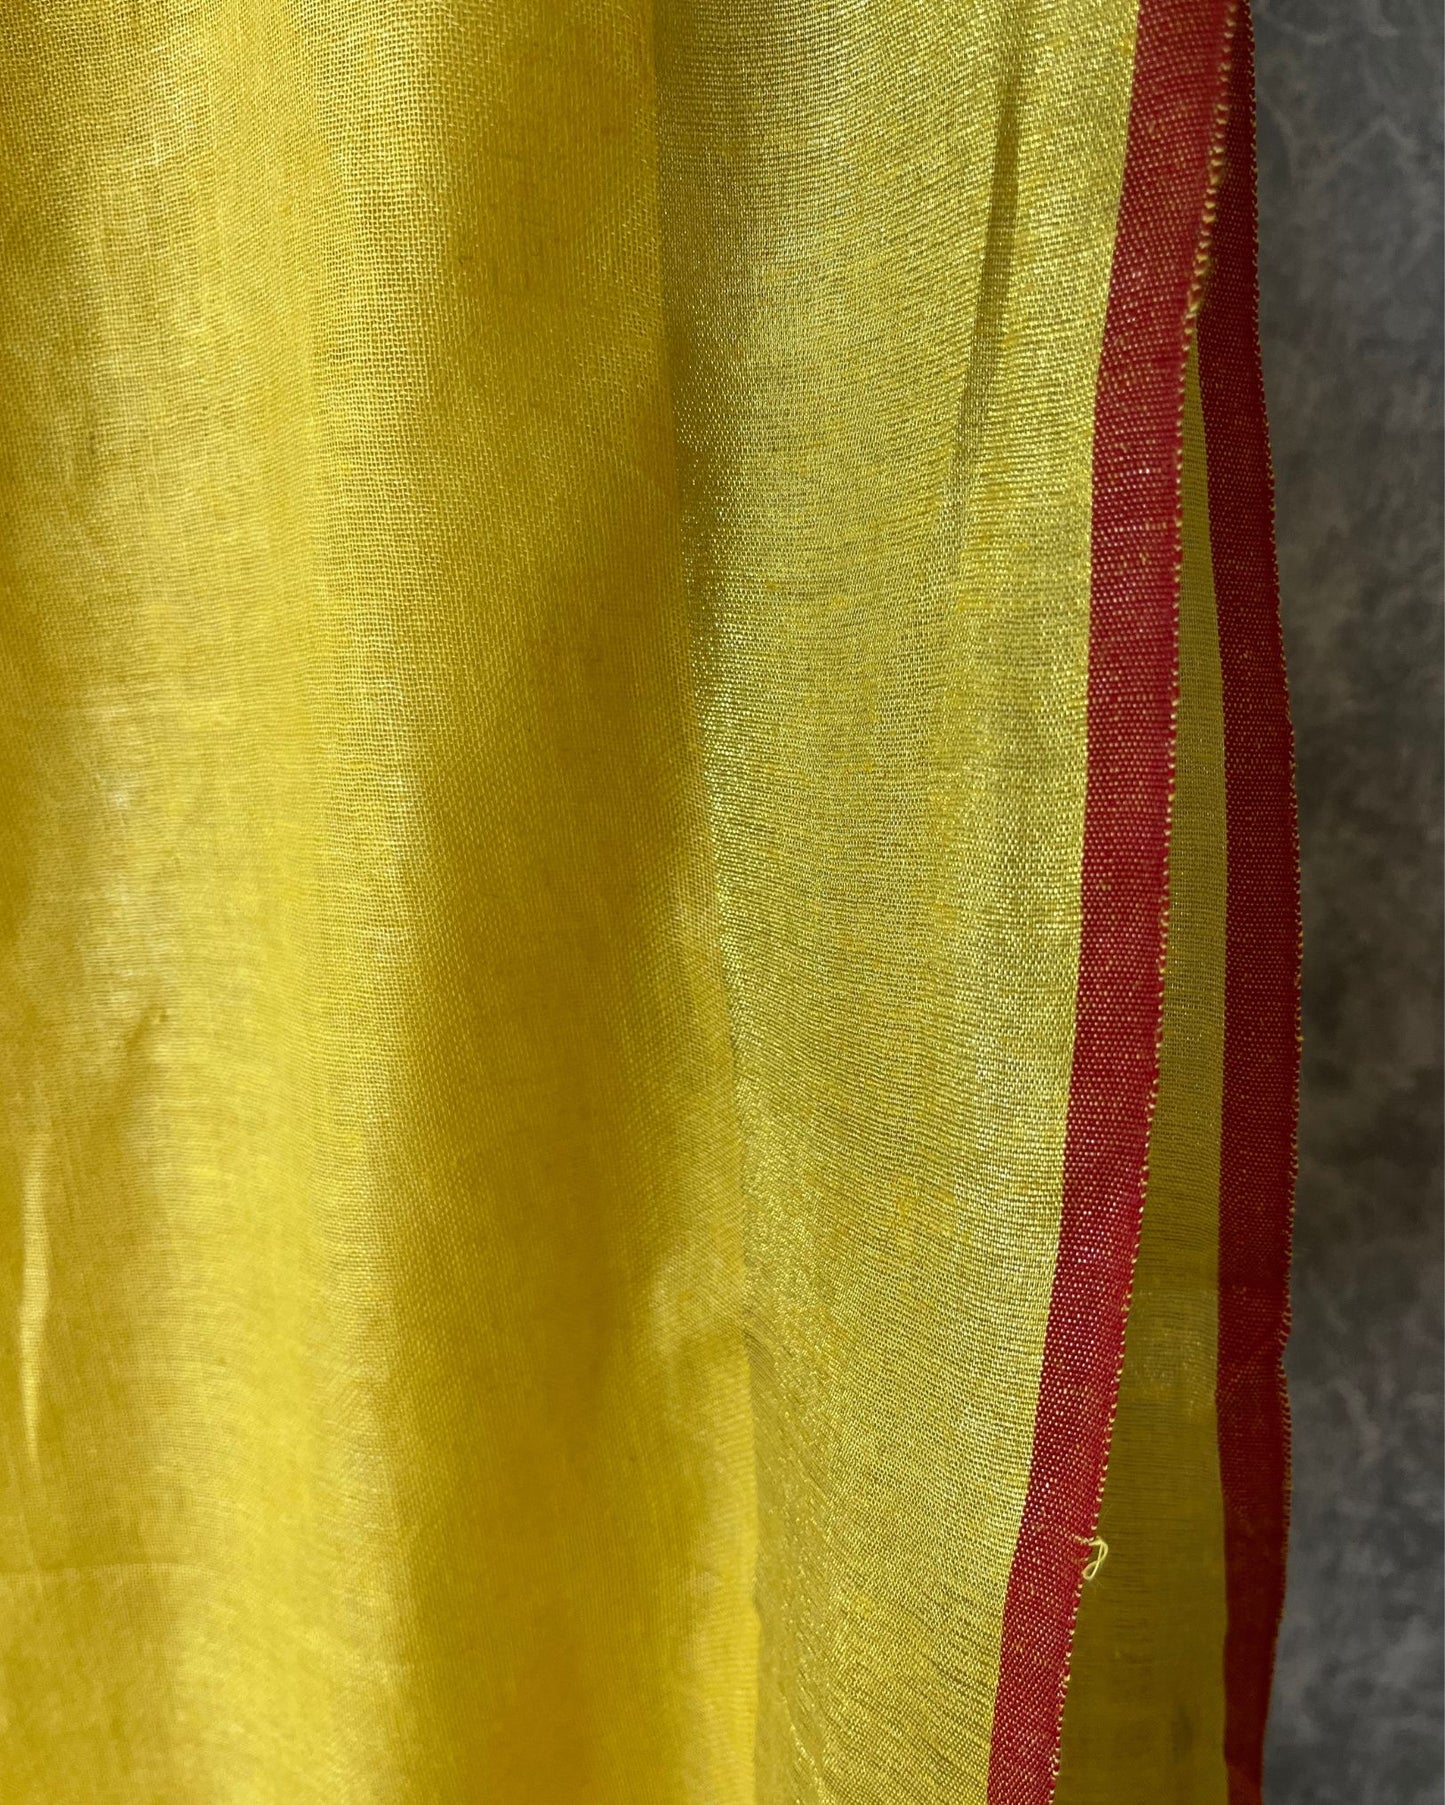 2510-Handwoven Pure Linen Yellow Saree with Blouse